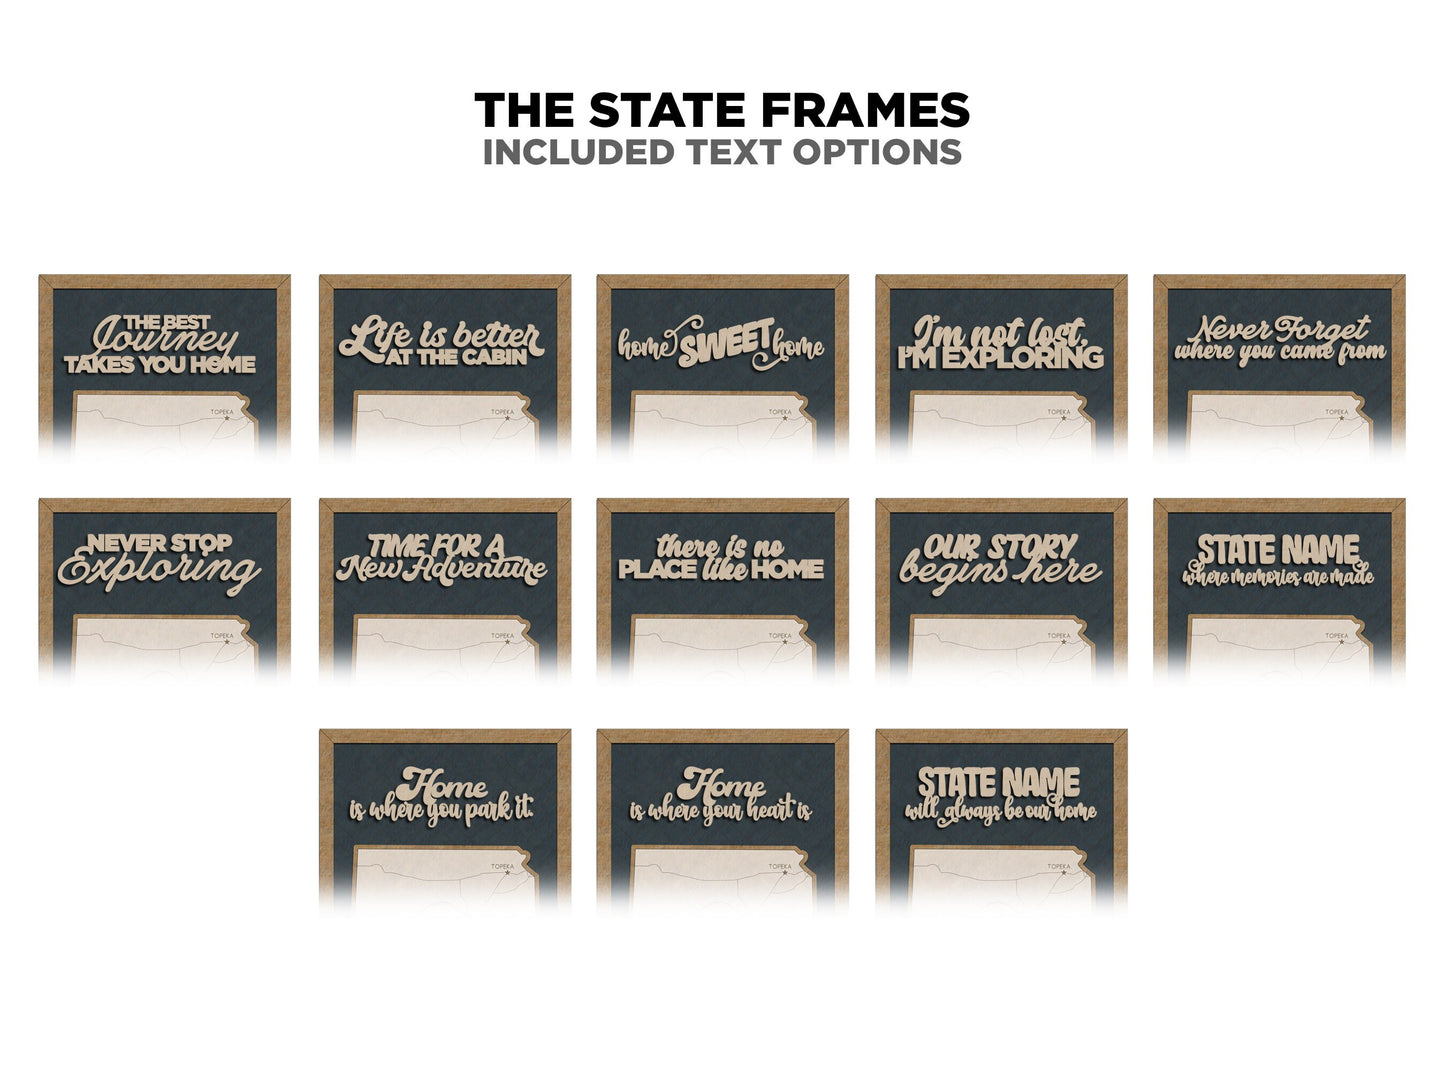 The Iowa State Frame - 13 text options, 12 backgrounds, 25 icons Included - Make over 7,500 designs - Glowforge & Lightburn Tested